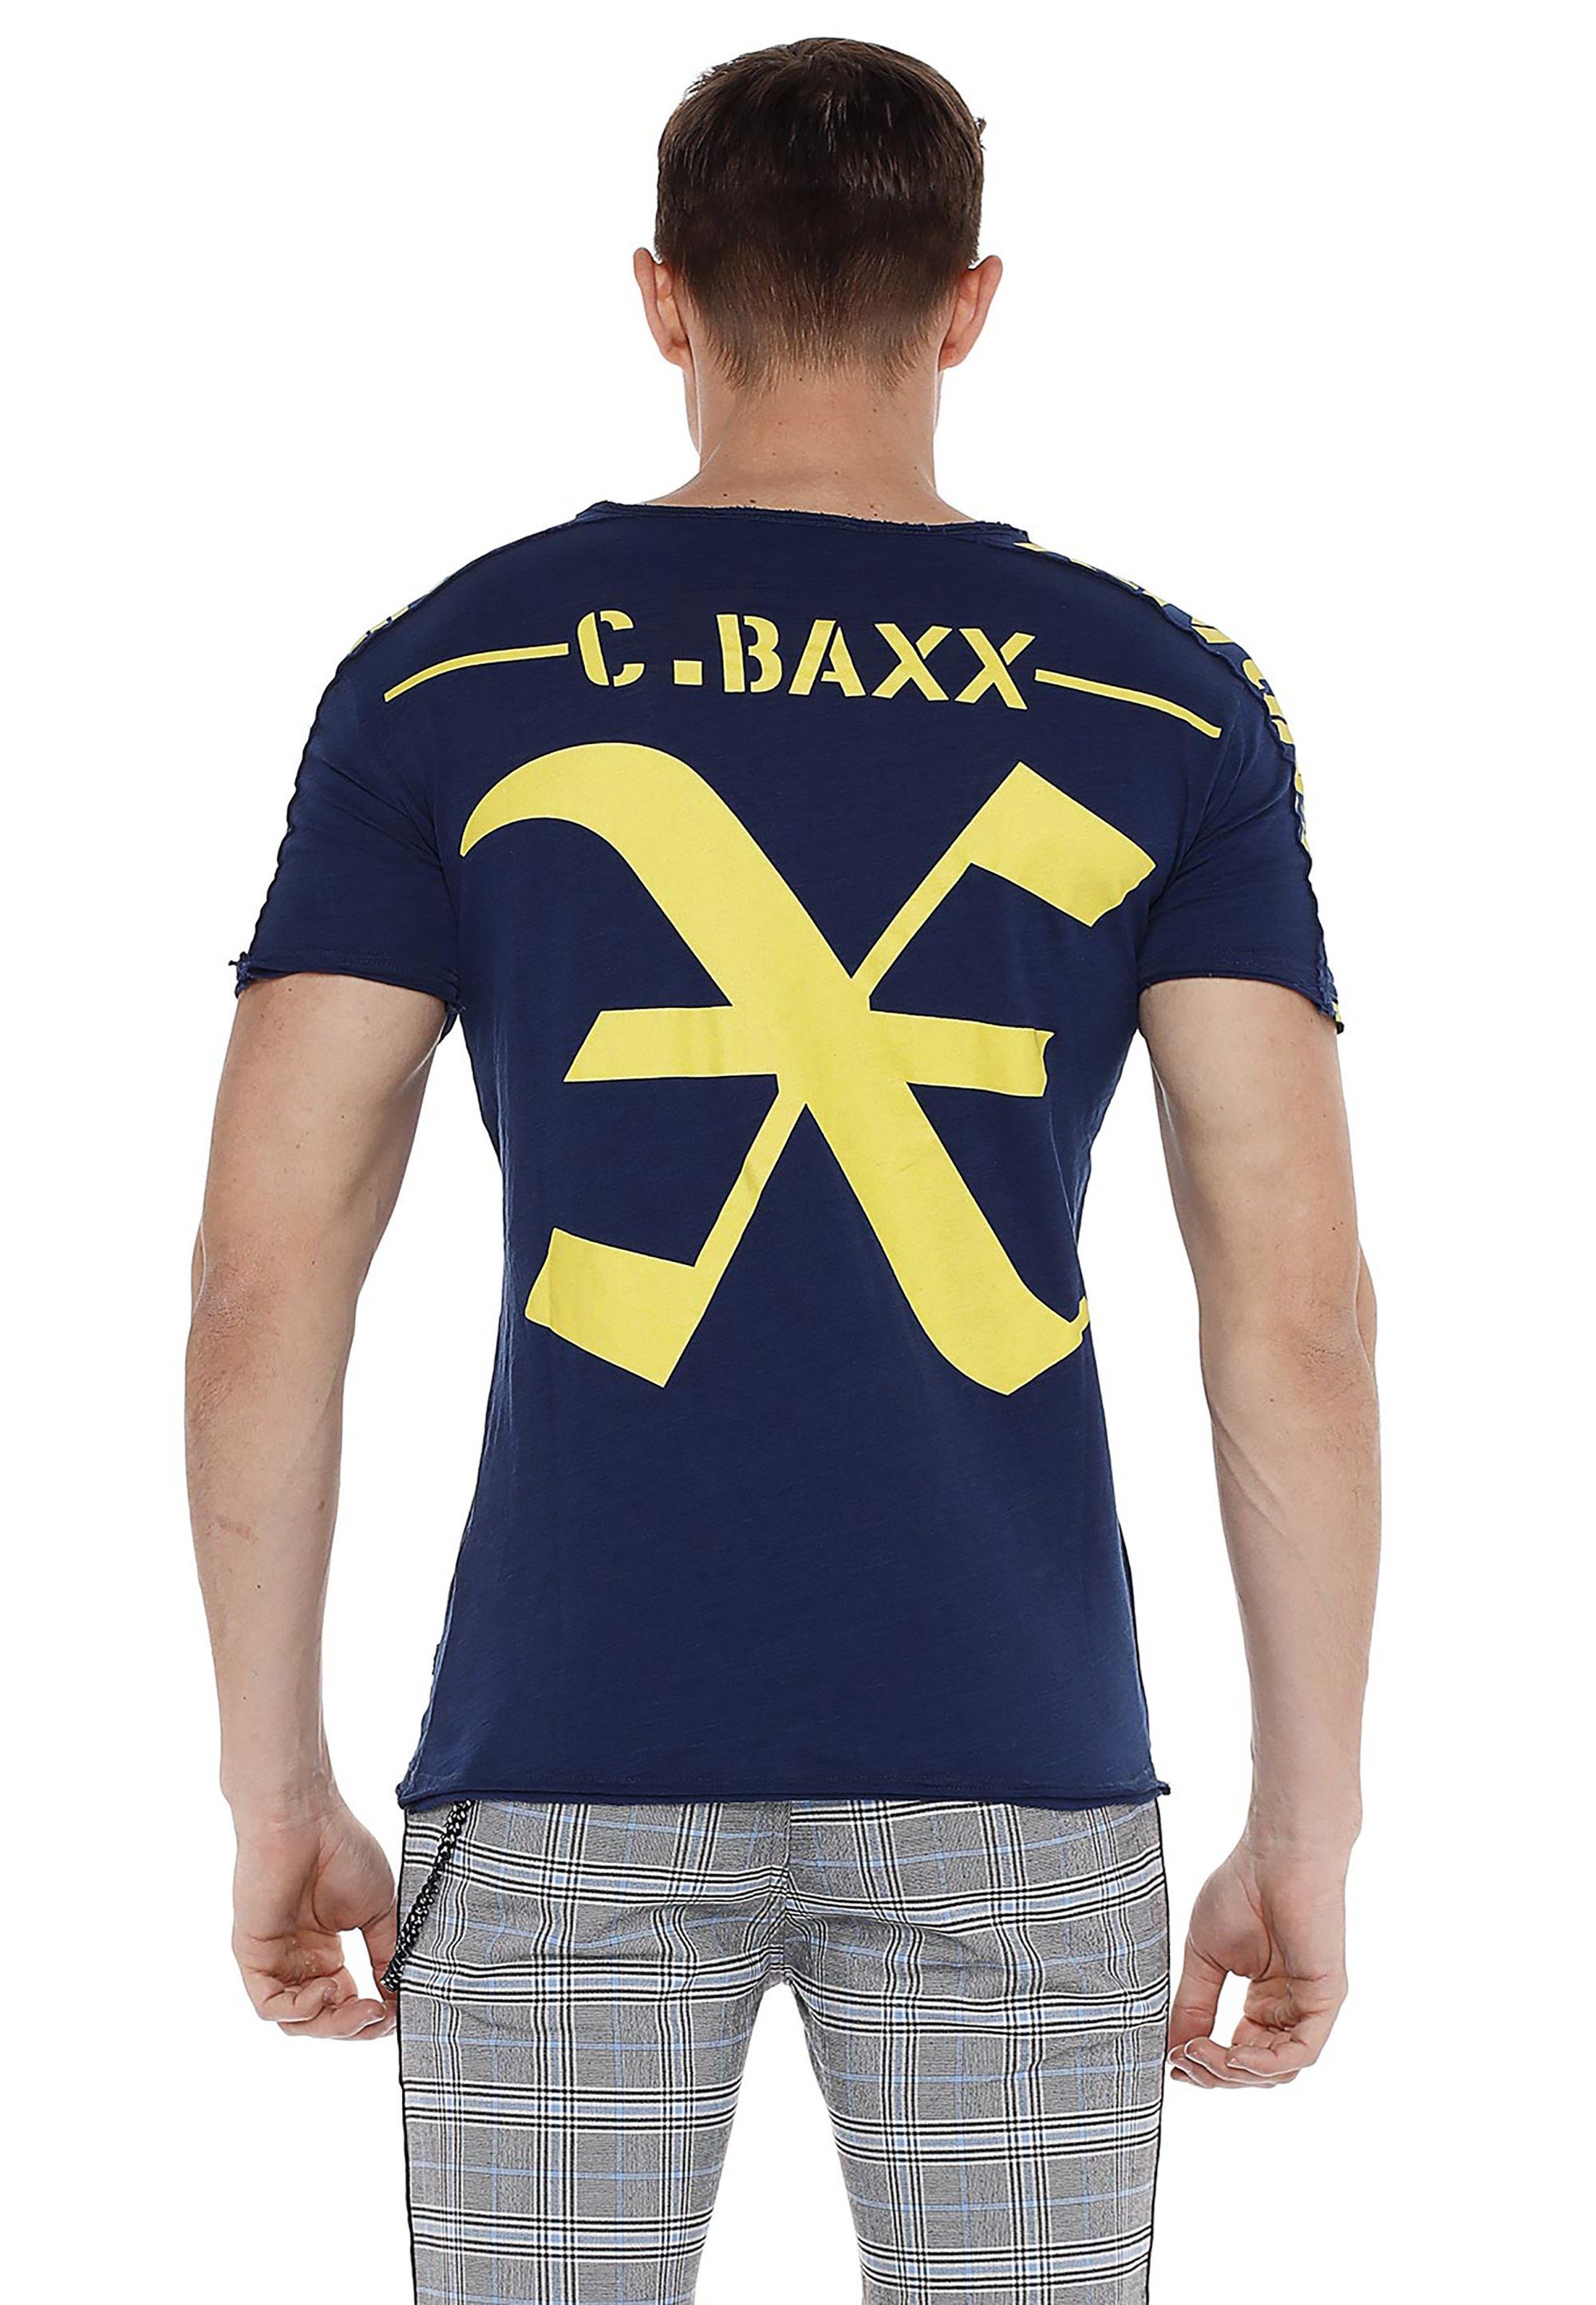 T-Shirt & Relaxed-Fit Cipo im Baxx